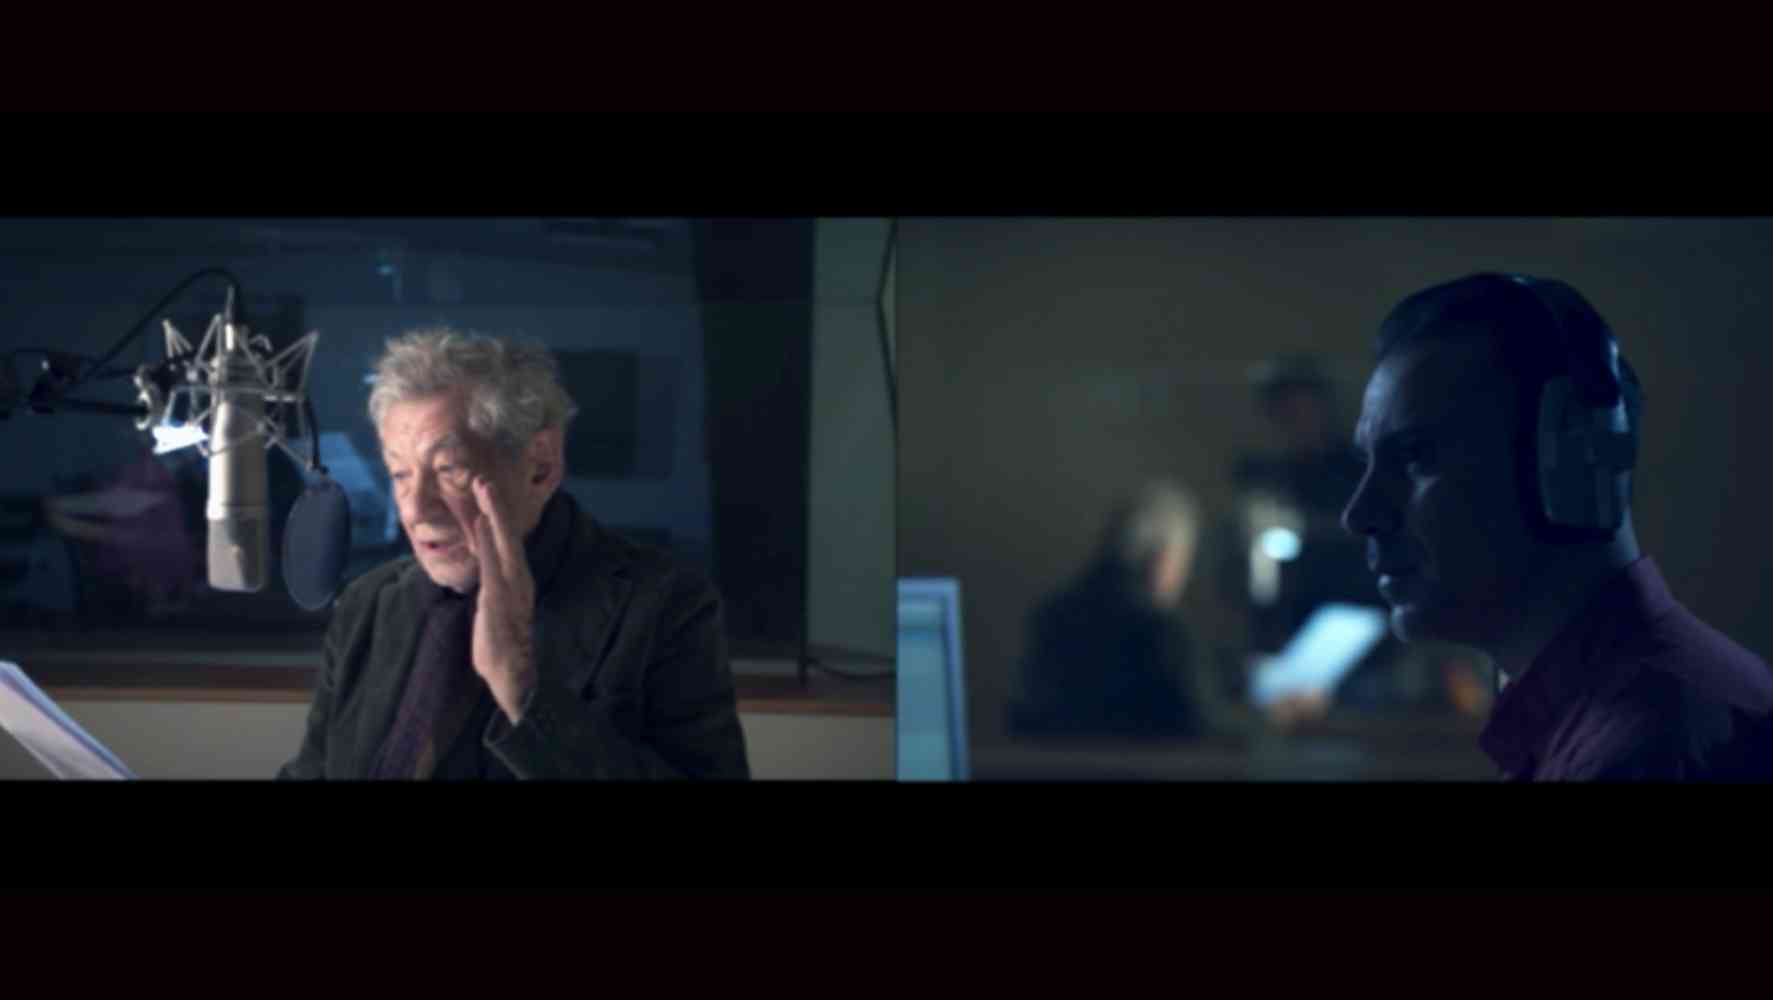 'The Father as 'Spectre':  Two Hamlets meet: Feature Film in Production - Ian McKellen plays the 'Ghost': Ben Turner plays Hamlet: Set in a recording studio this double screen sequence was shot using two parallel cameras and incorporated the 'resistances' generated by the sound equipment. Specific to digital developments in film. In a way that Shakespeare or the theatre could not envisage or produce.